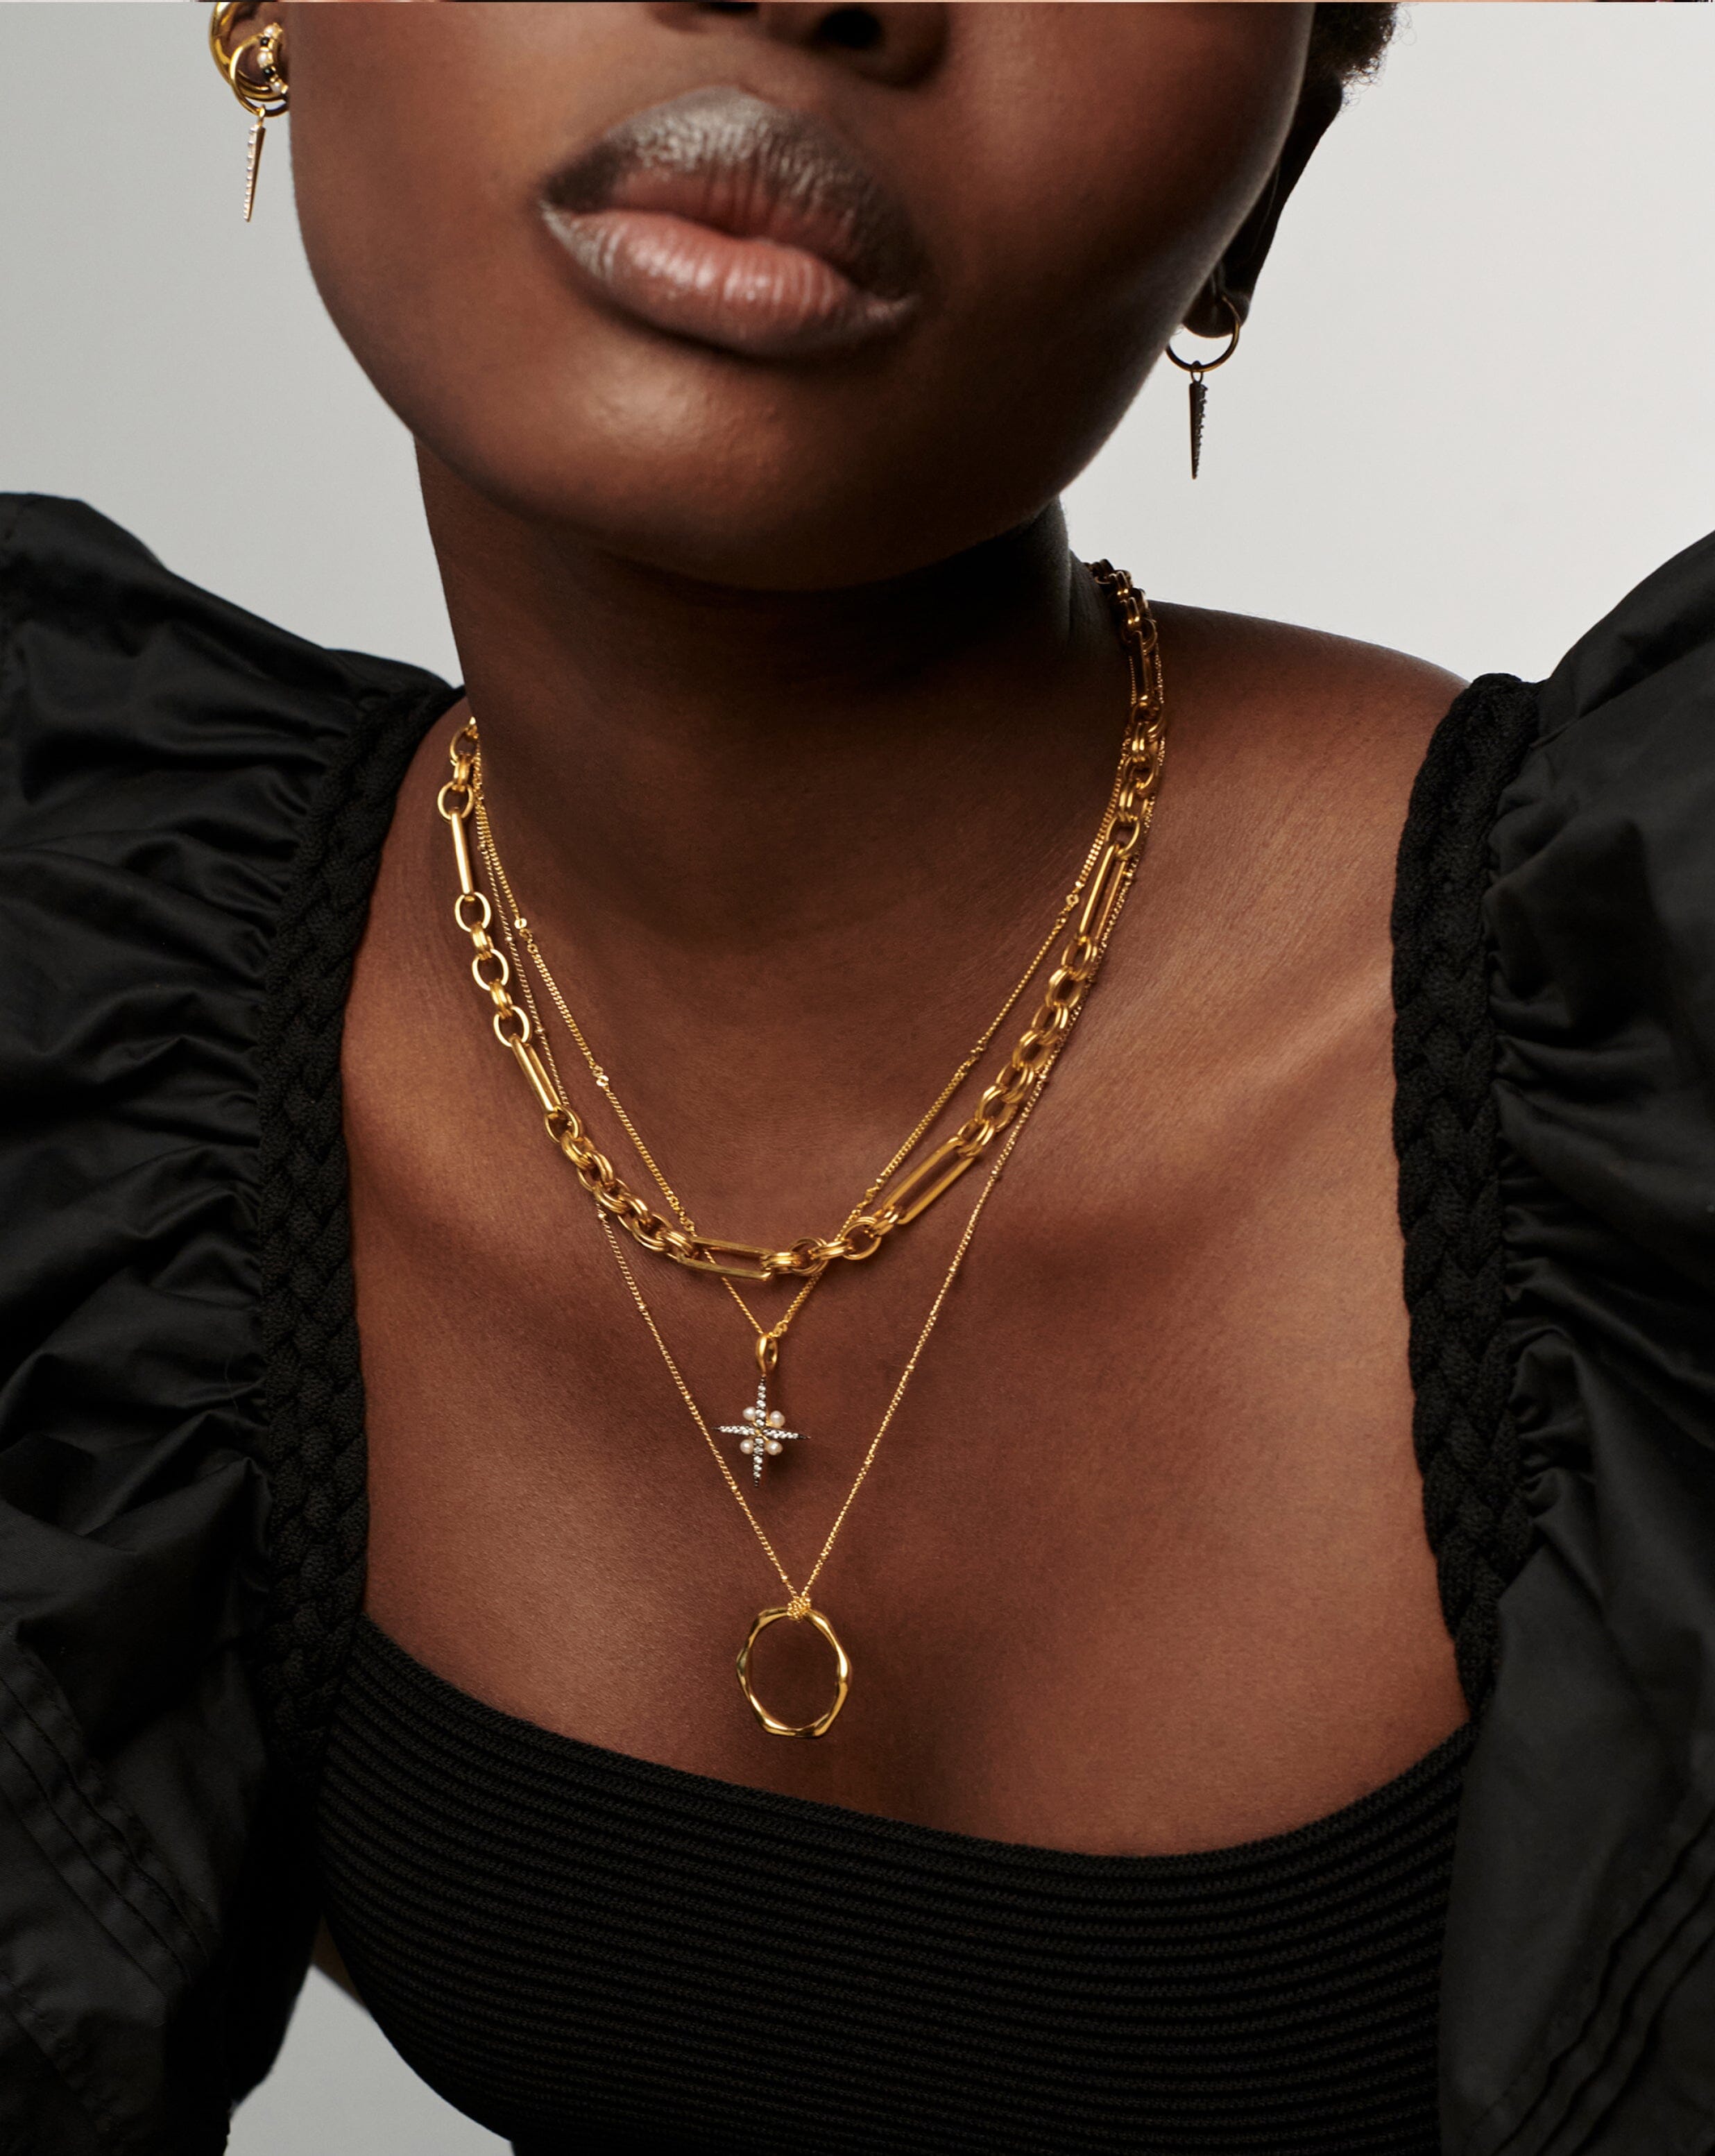 Buy Gold-Toned Necklaces & Pendants for Women by MAHI Online | Ajio.com